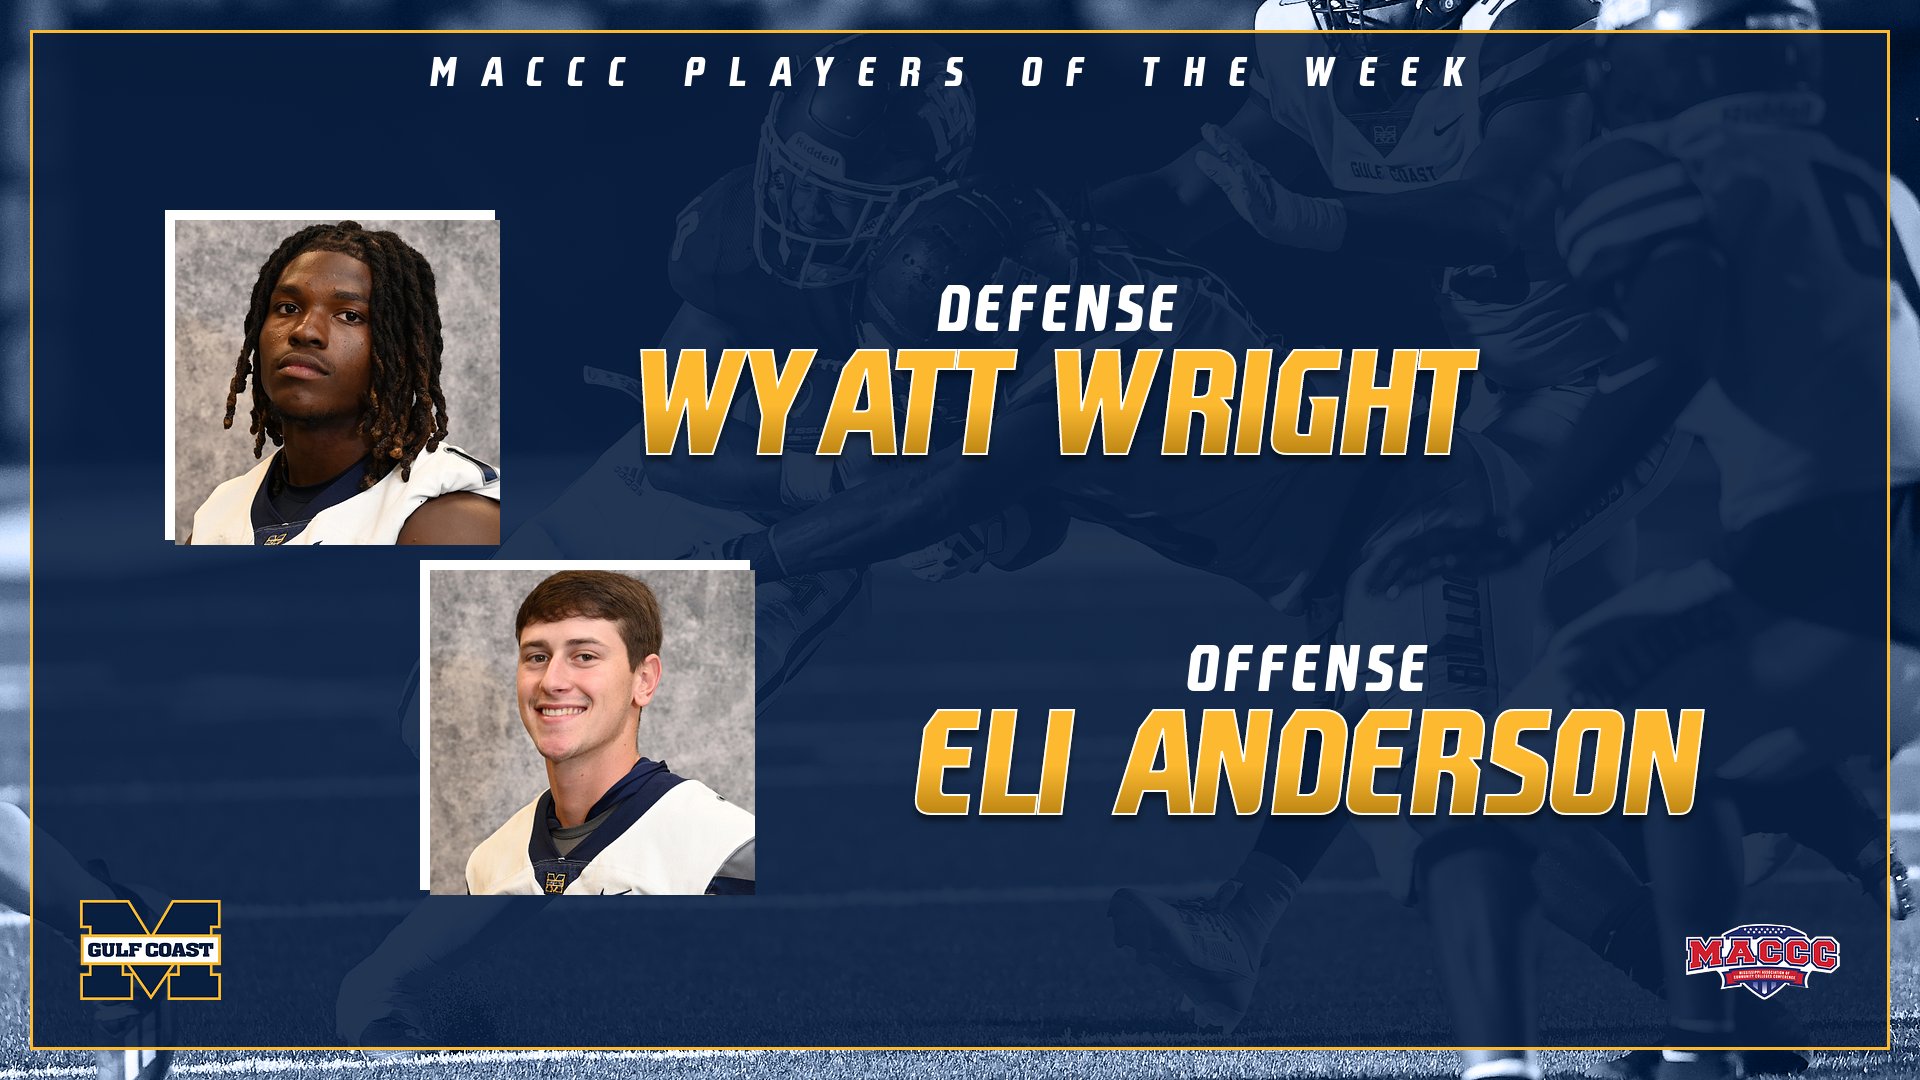 Wright, Anderson win MACCC Player of the Week